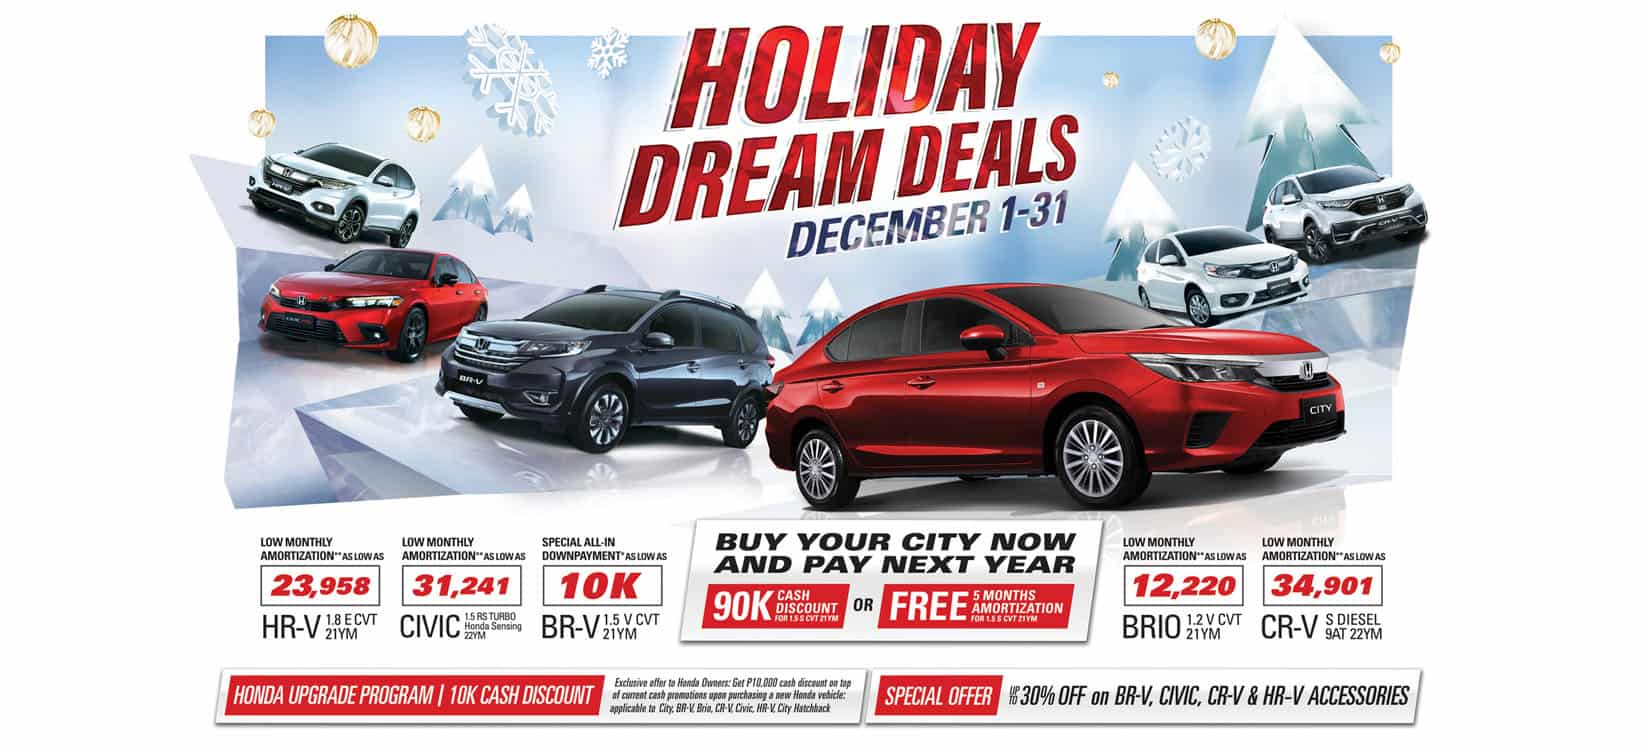 Get the best deals and enjoy the Christmas season with Honda’s  “Holiday Dream Deals” and mall display this December